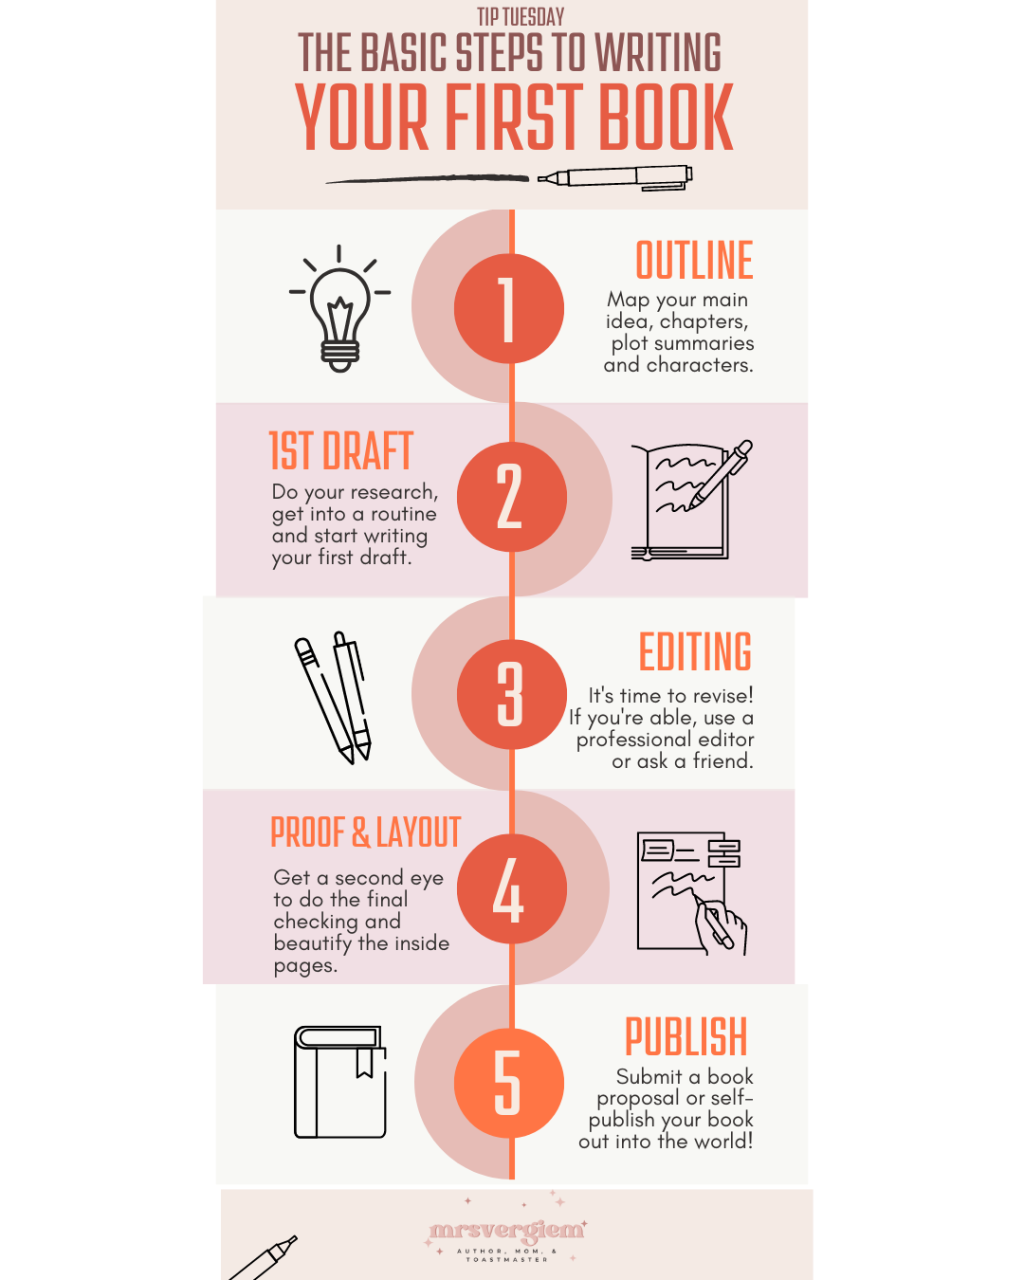 Tip Tuesday: Writing Your First Book